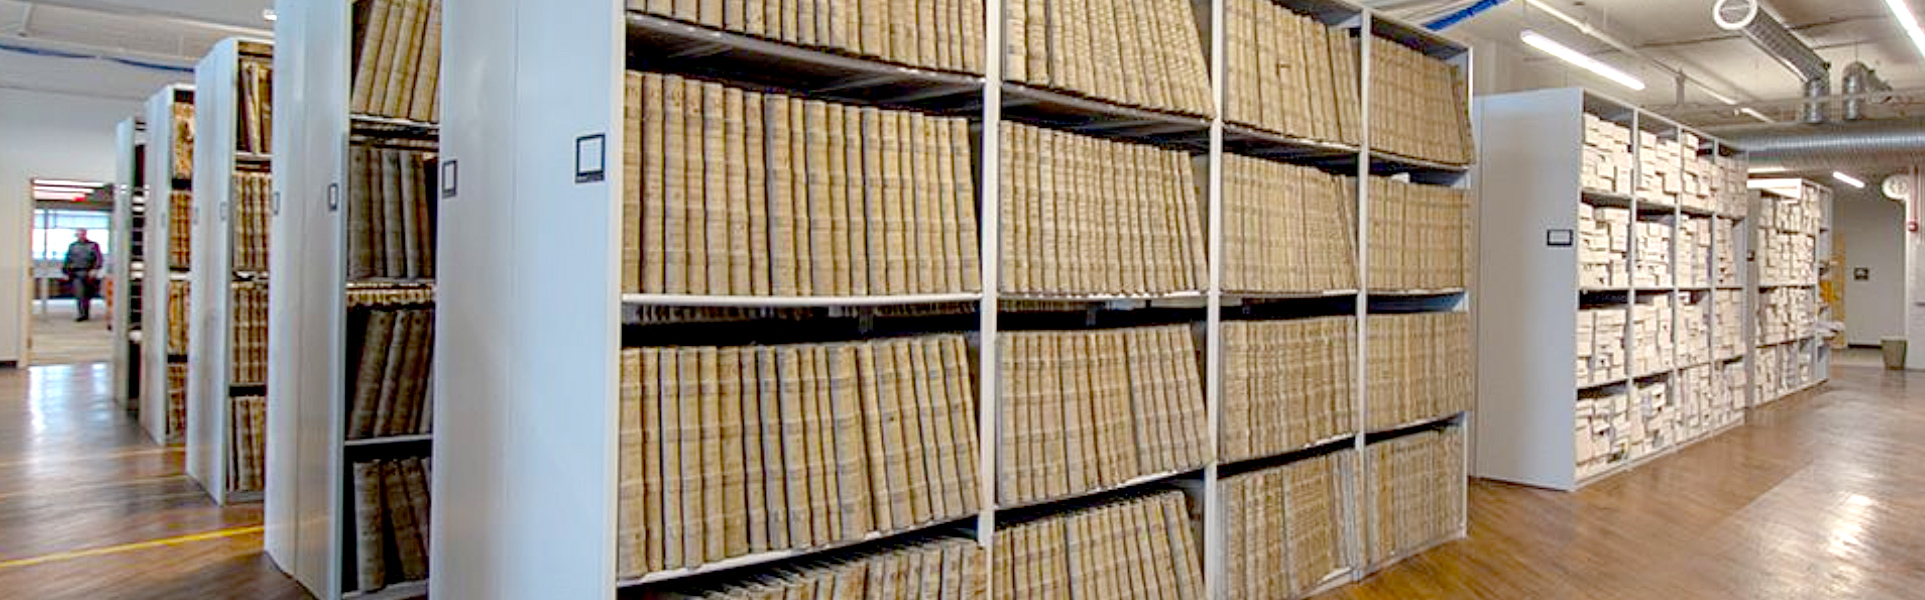 government archive storage systems